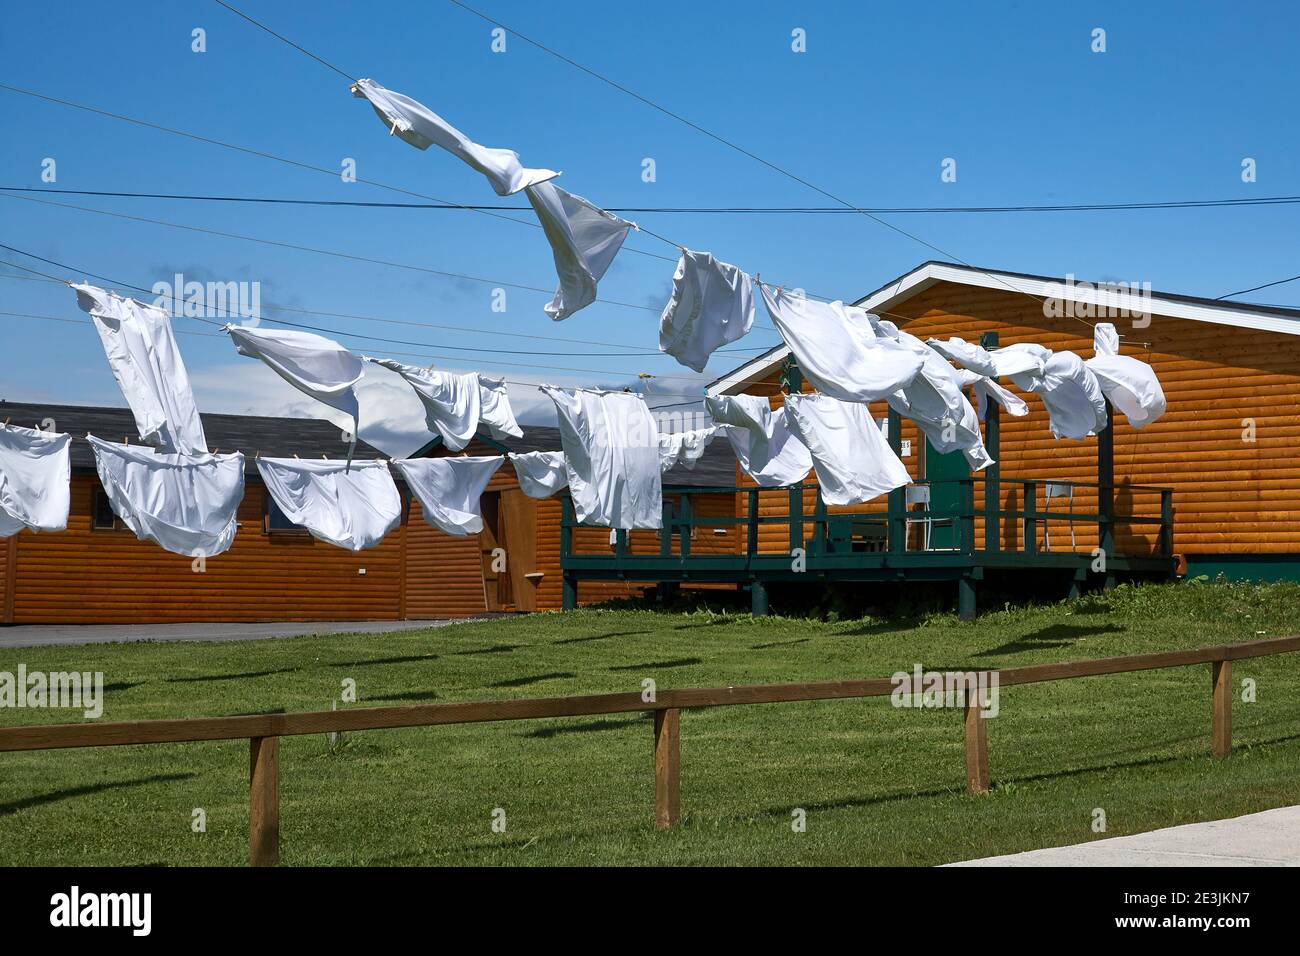 Washing drying in the wind by wood cabin in Newfoundland Stock Photo